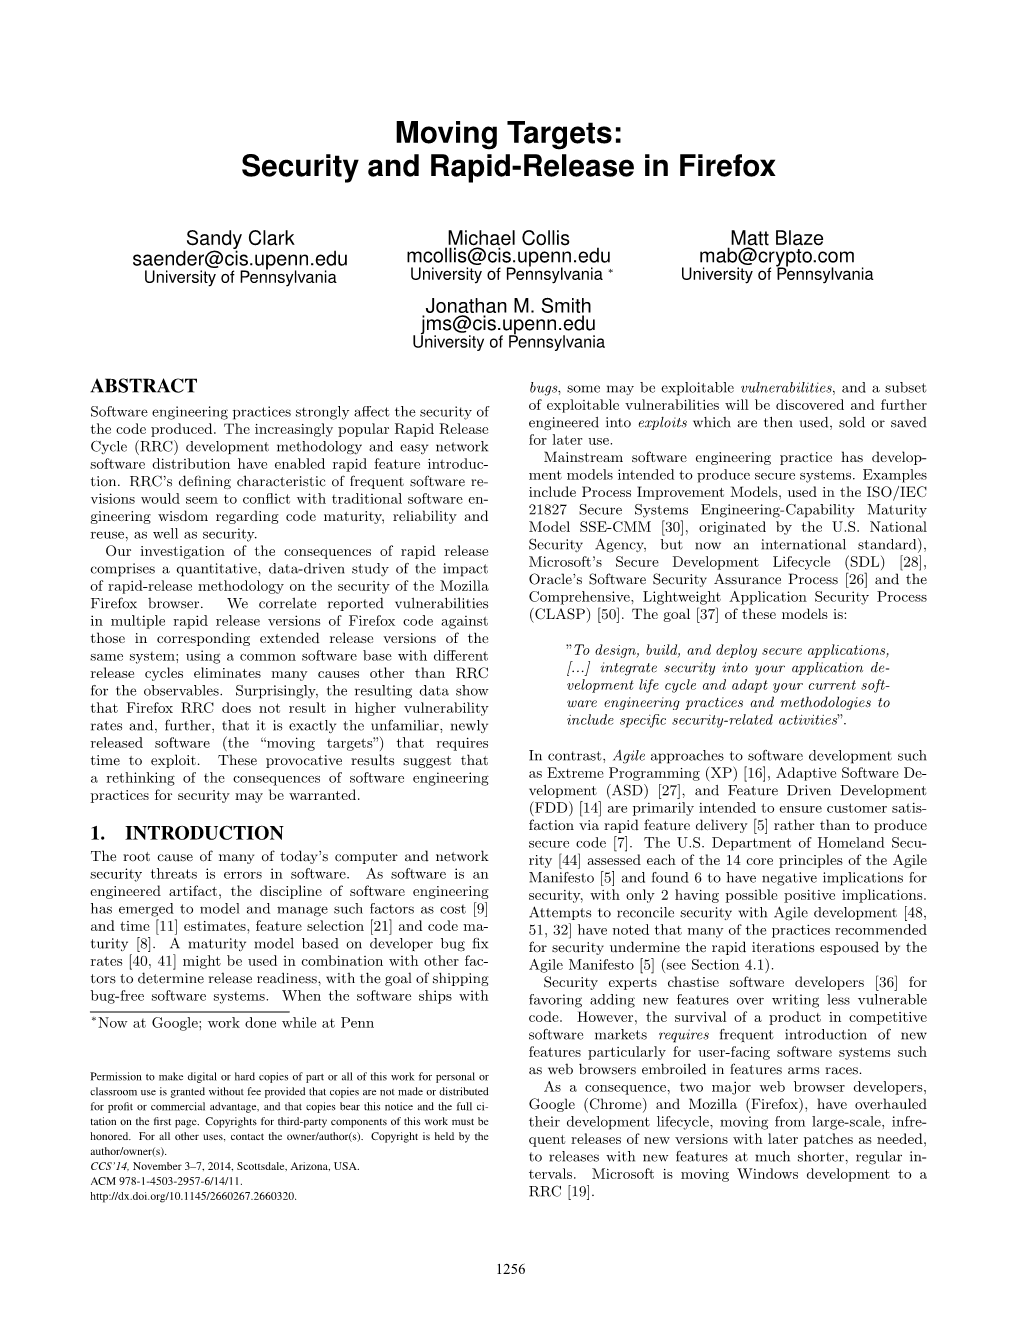 Security and Rapid-Release in Firefox